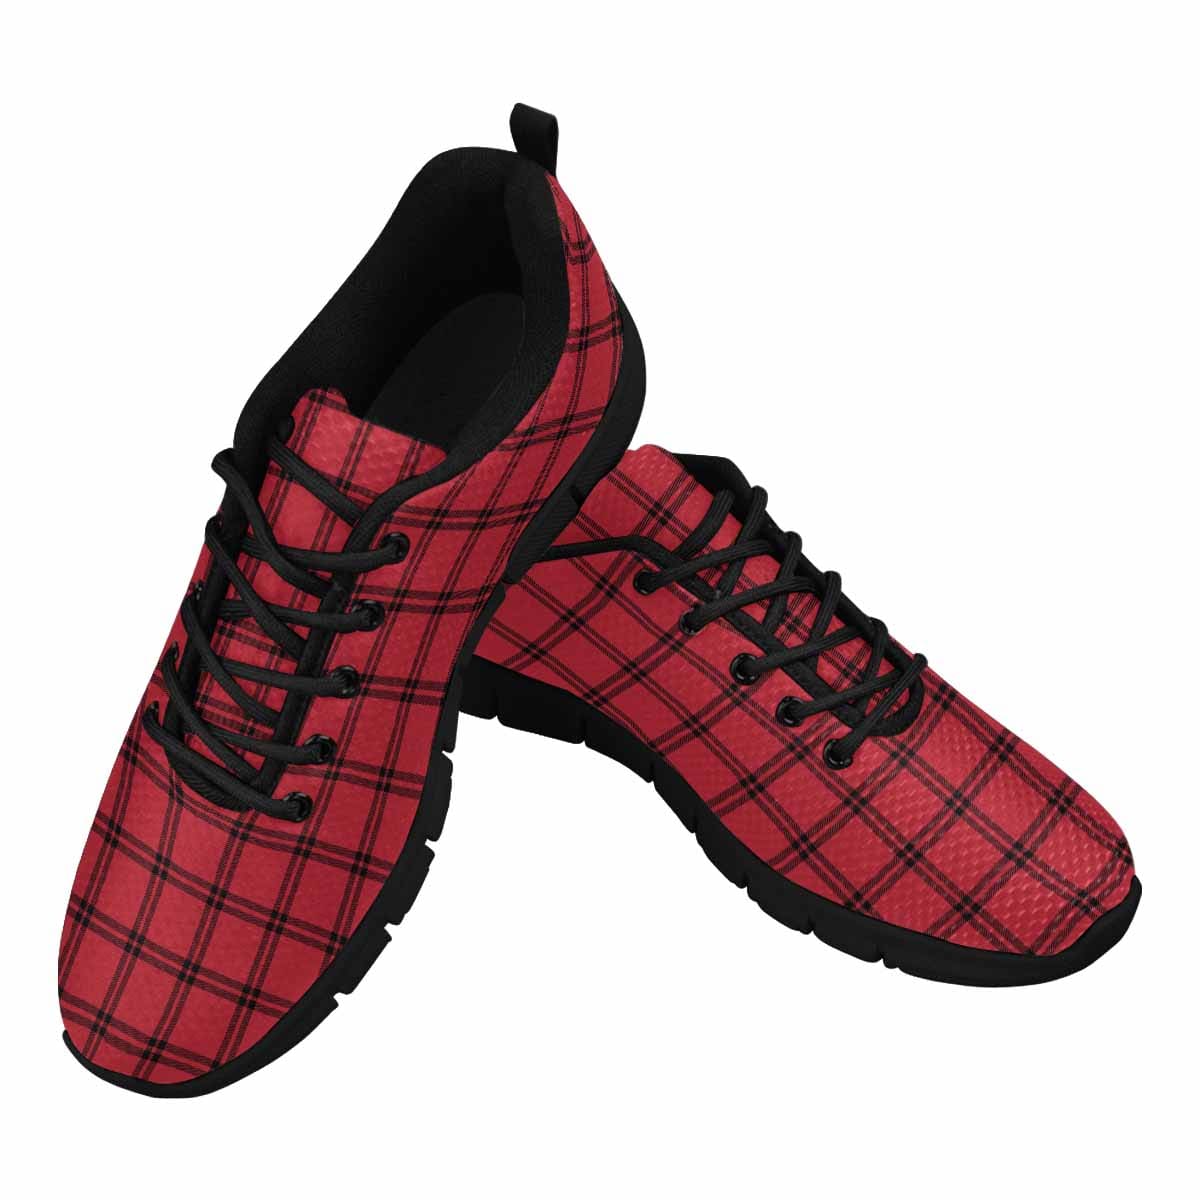 Sneakers For Men Buffalo Plaid Red And Black - Running Shoes Dg836 - Mens